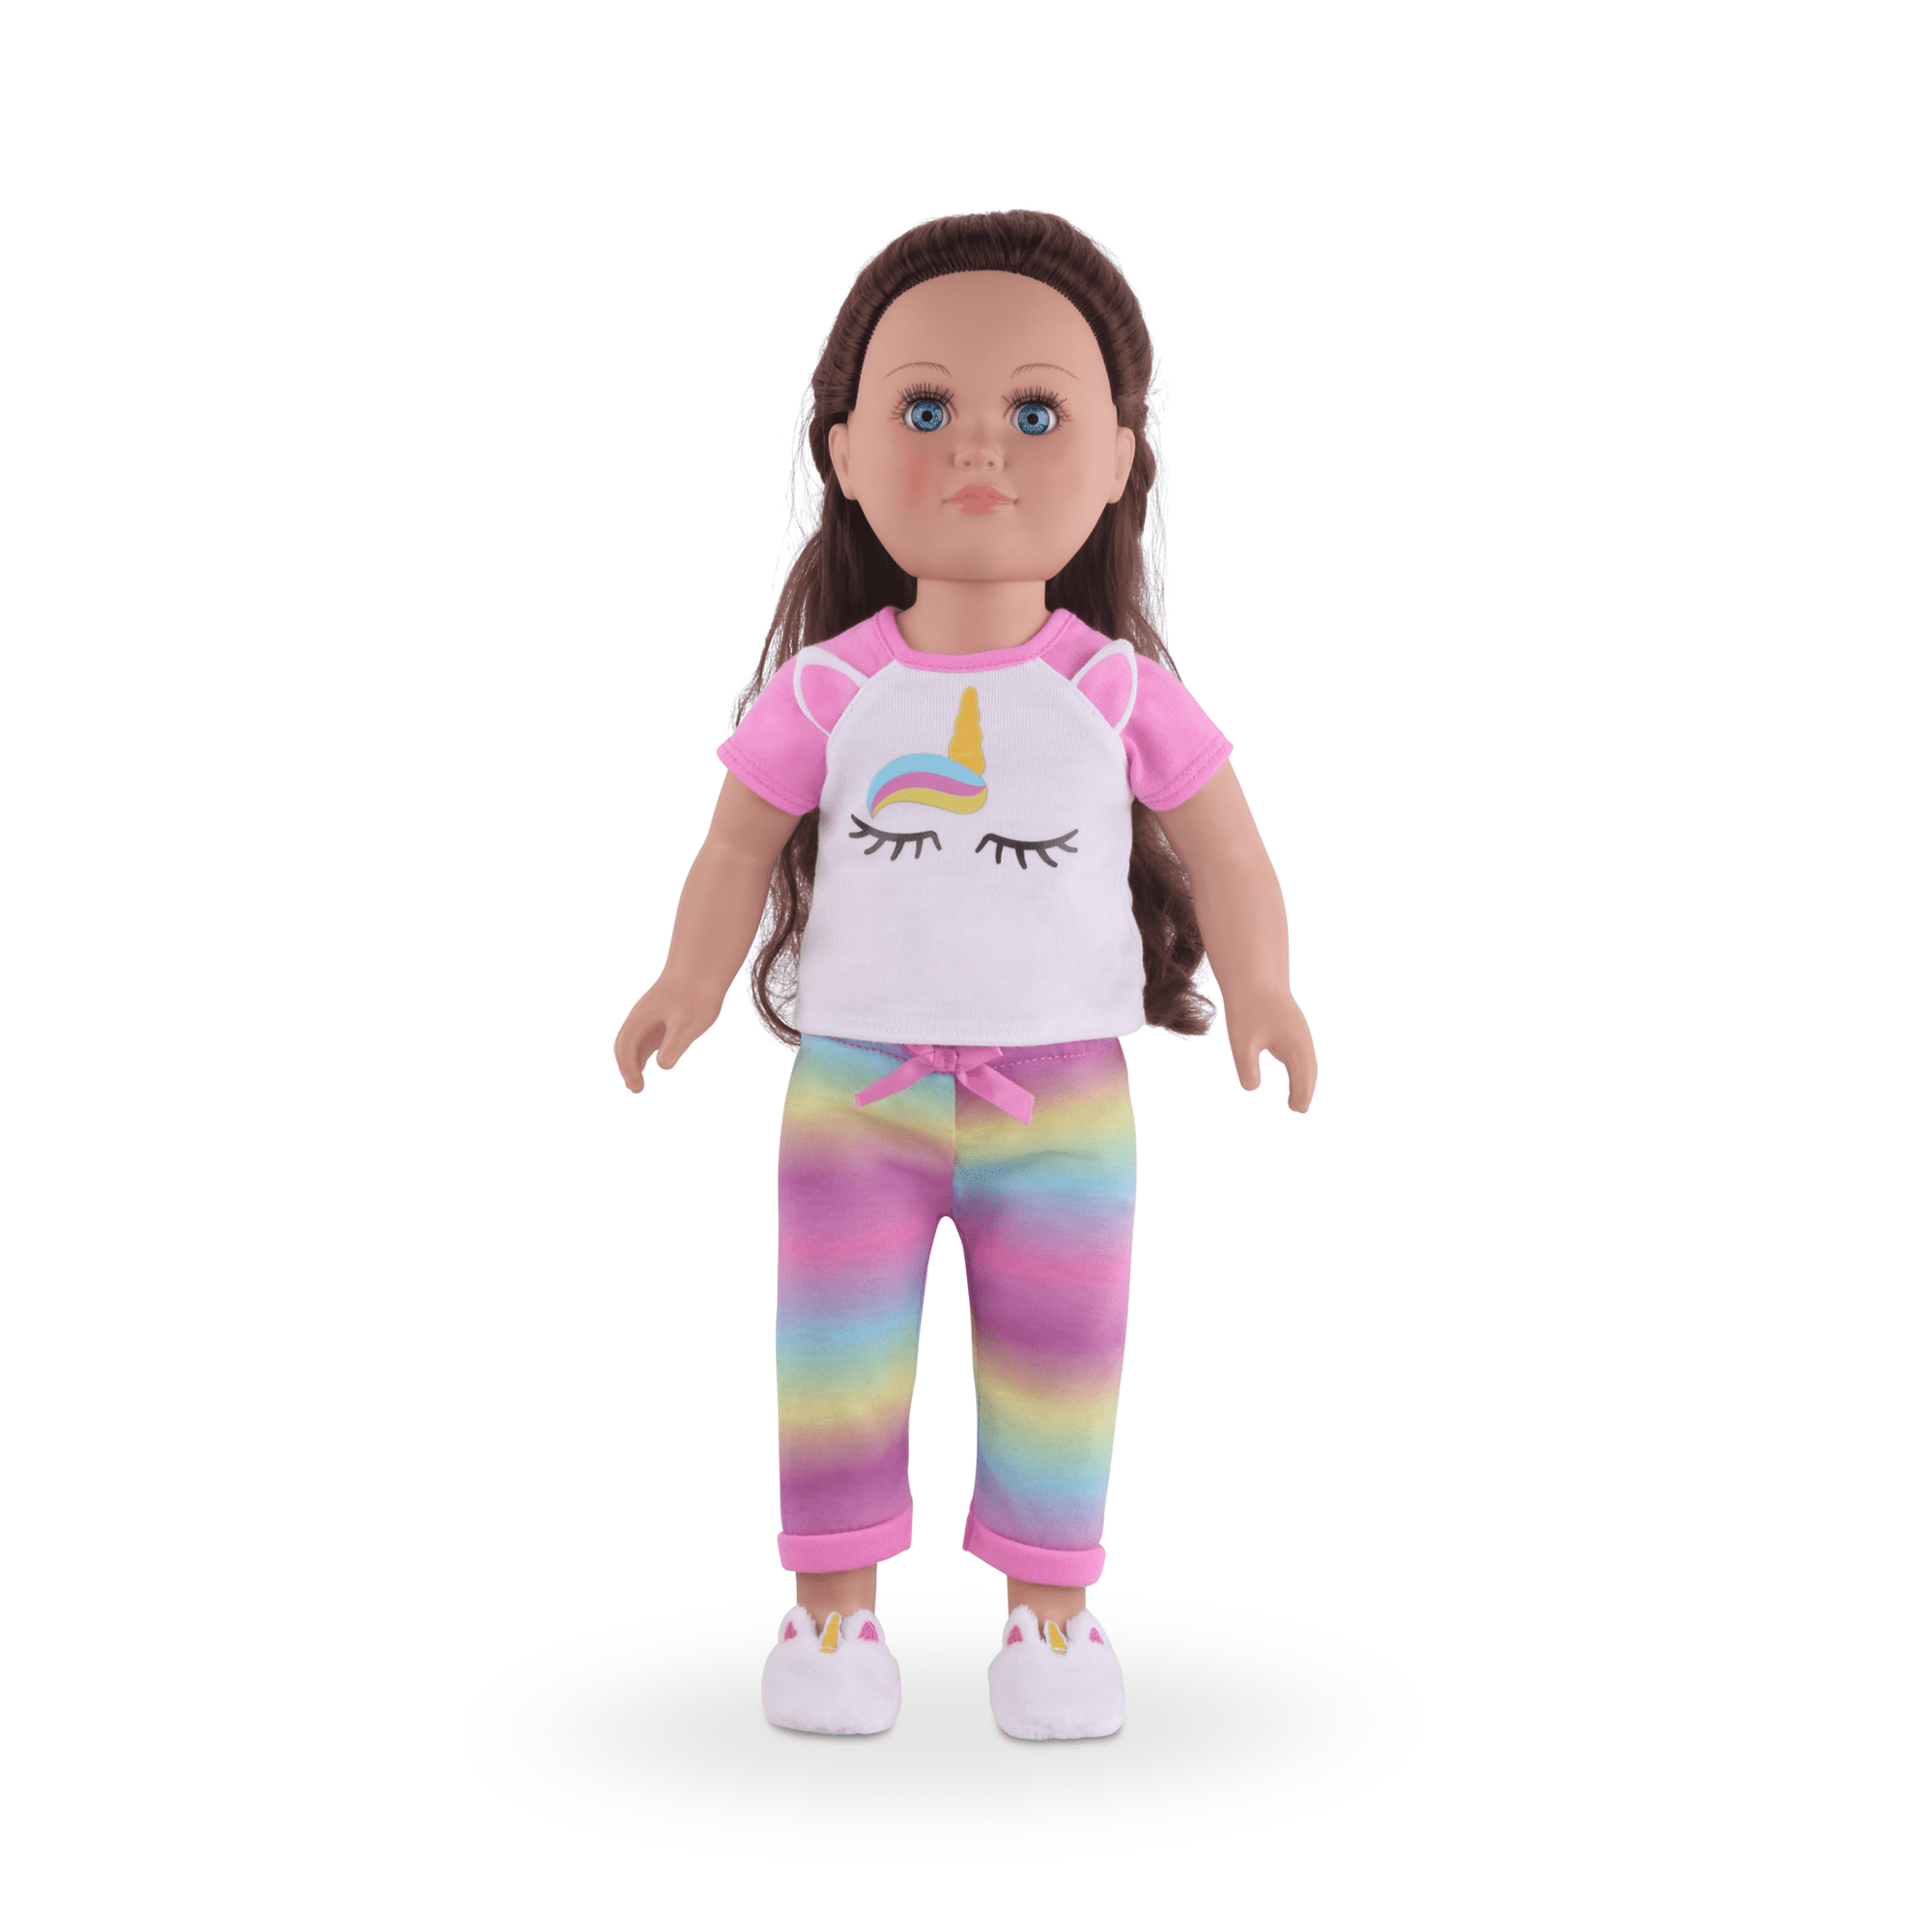  28 Pack Girl Dolls Clothes and Accessories, 2 Storytelling  Pajamas, 3 Fashion Dresses, 3 Clothing Outfits, 10 Shoes, Travel Set for  11.5 inch Dolls, Mini School Supplies : Toys & Games